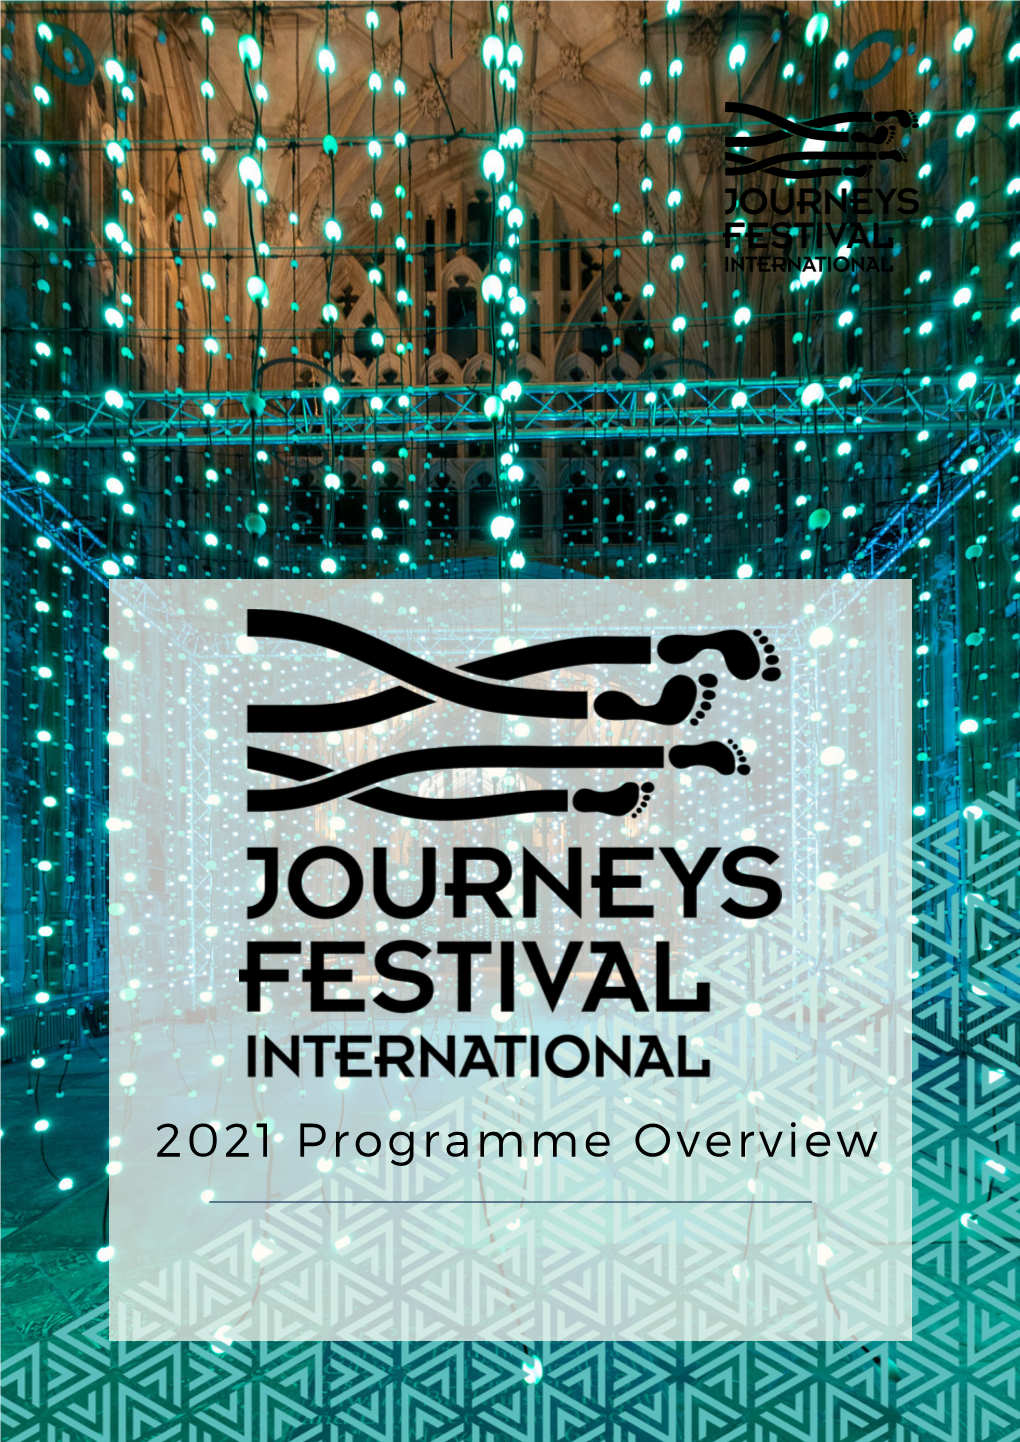 2021 Programme Overview the FESTIVAL Leicester, Manchester, Portsmouth